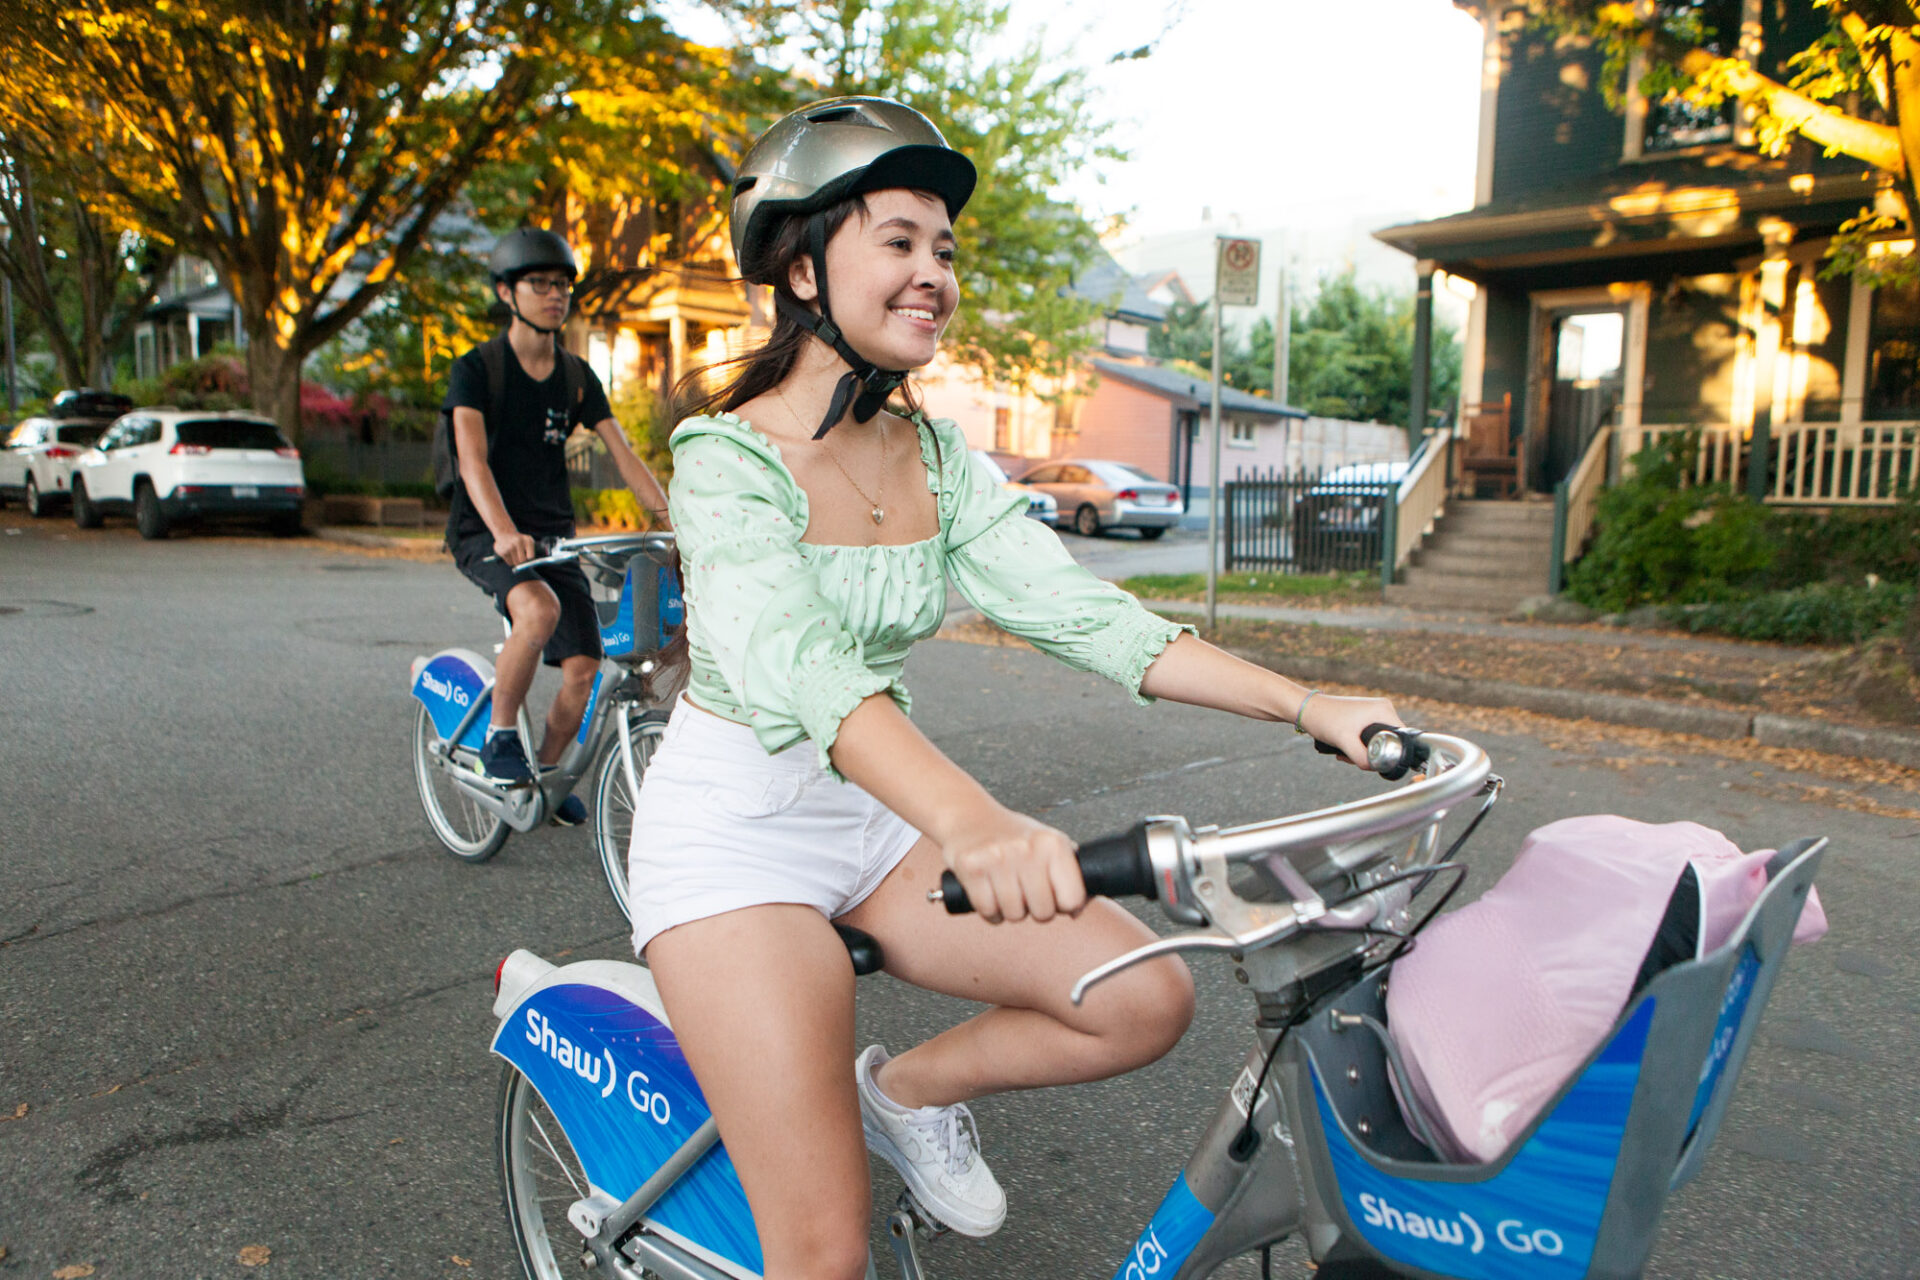 A young woman smiles as she rides with her boyfriend in Strathcona.